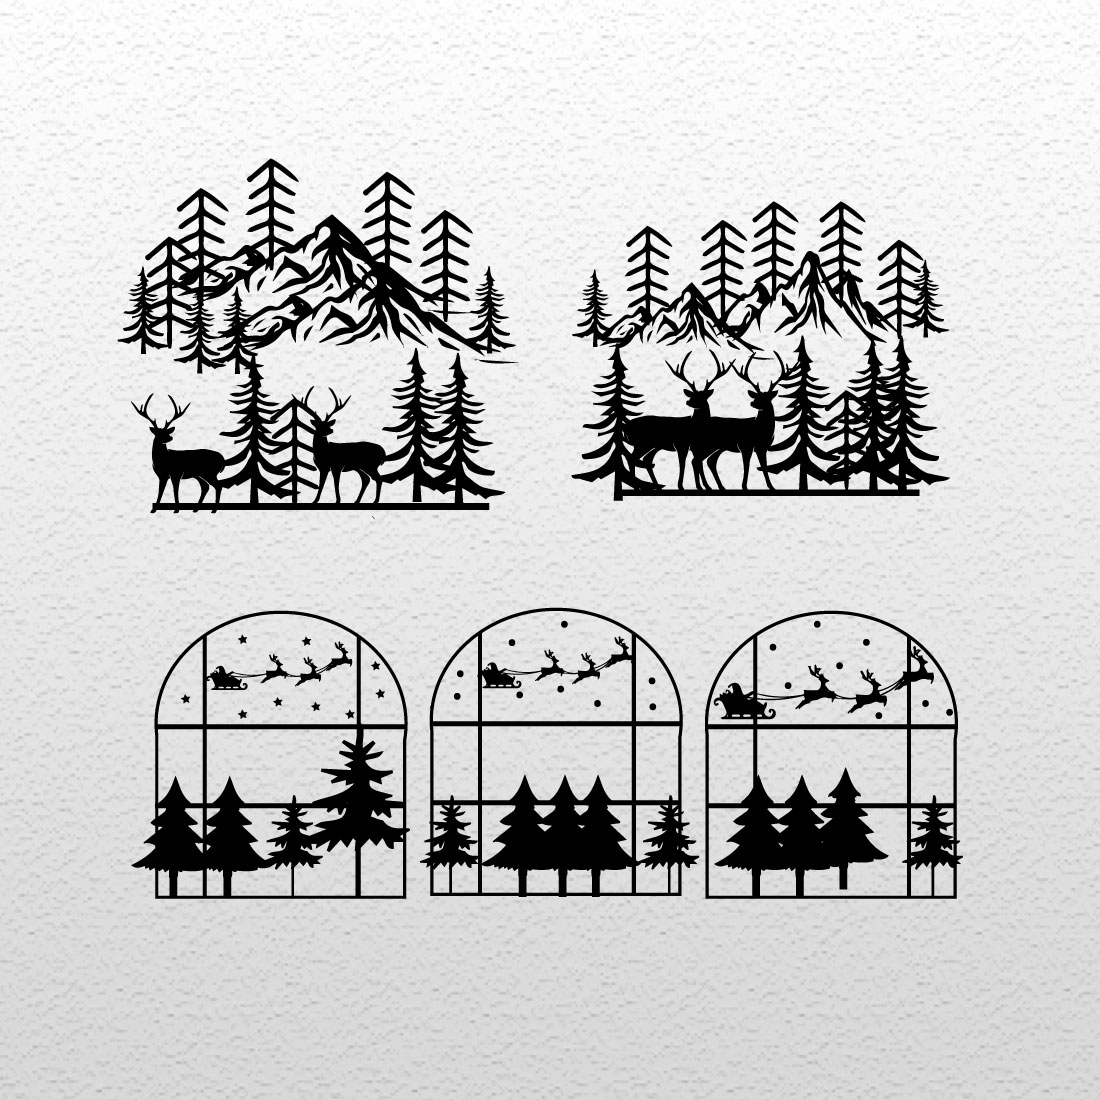 Pack of black adorable images of Christmas woods in the window